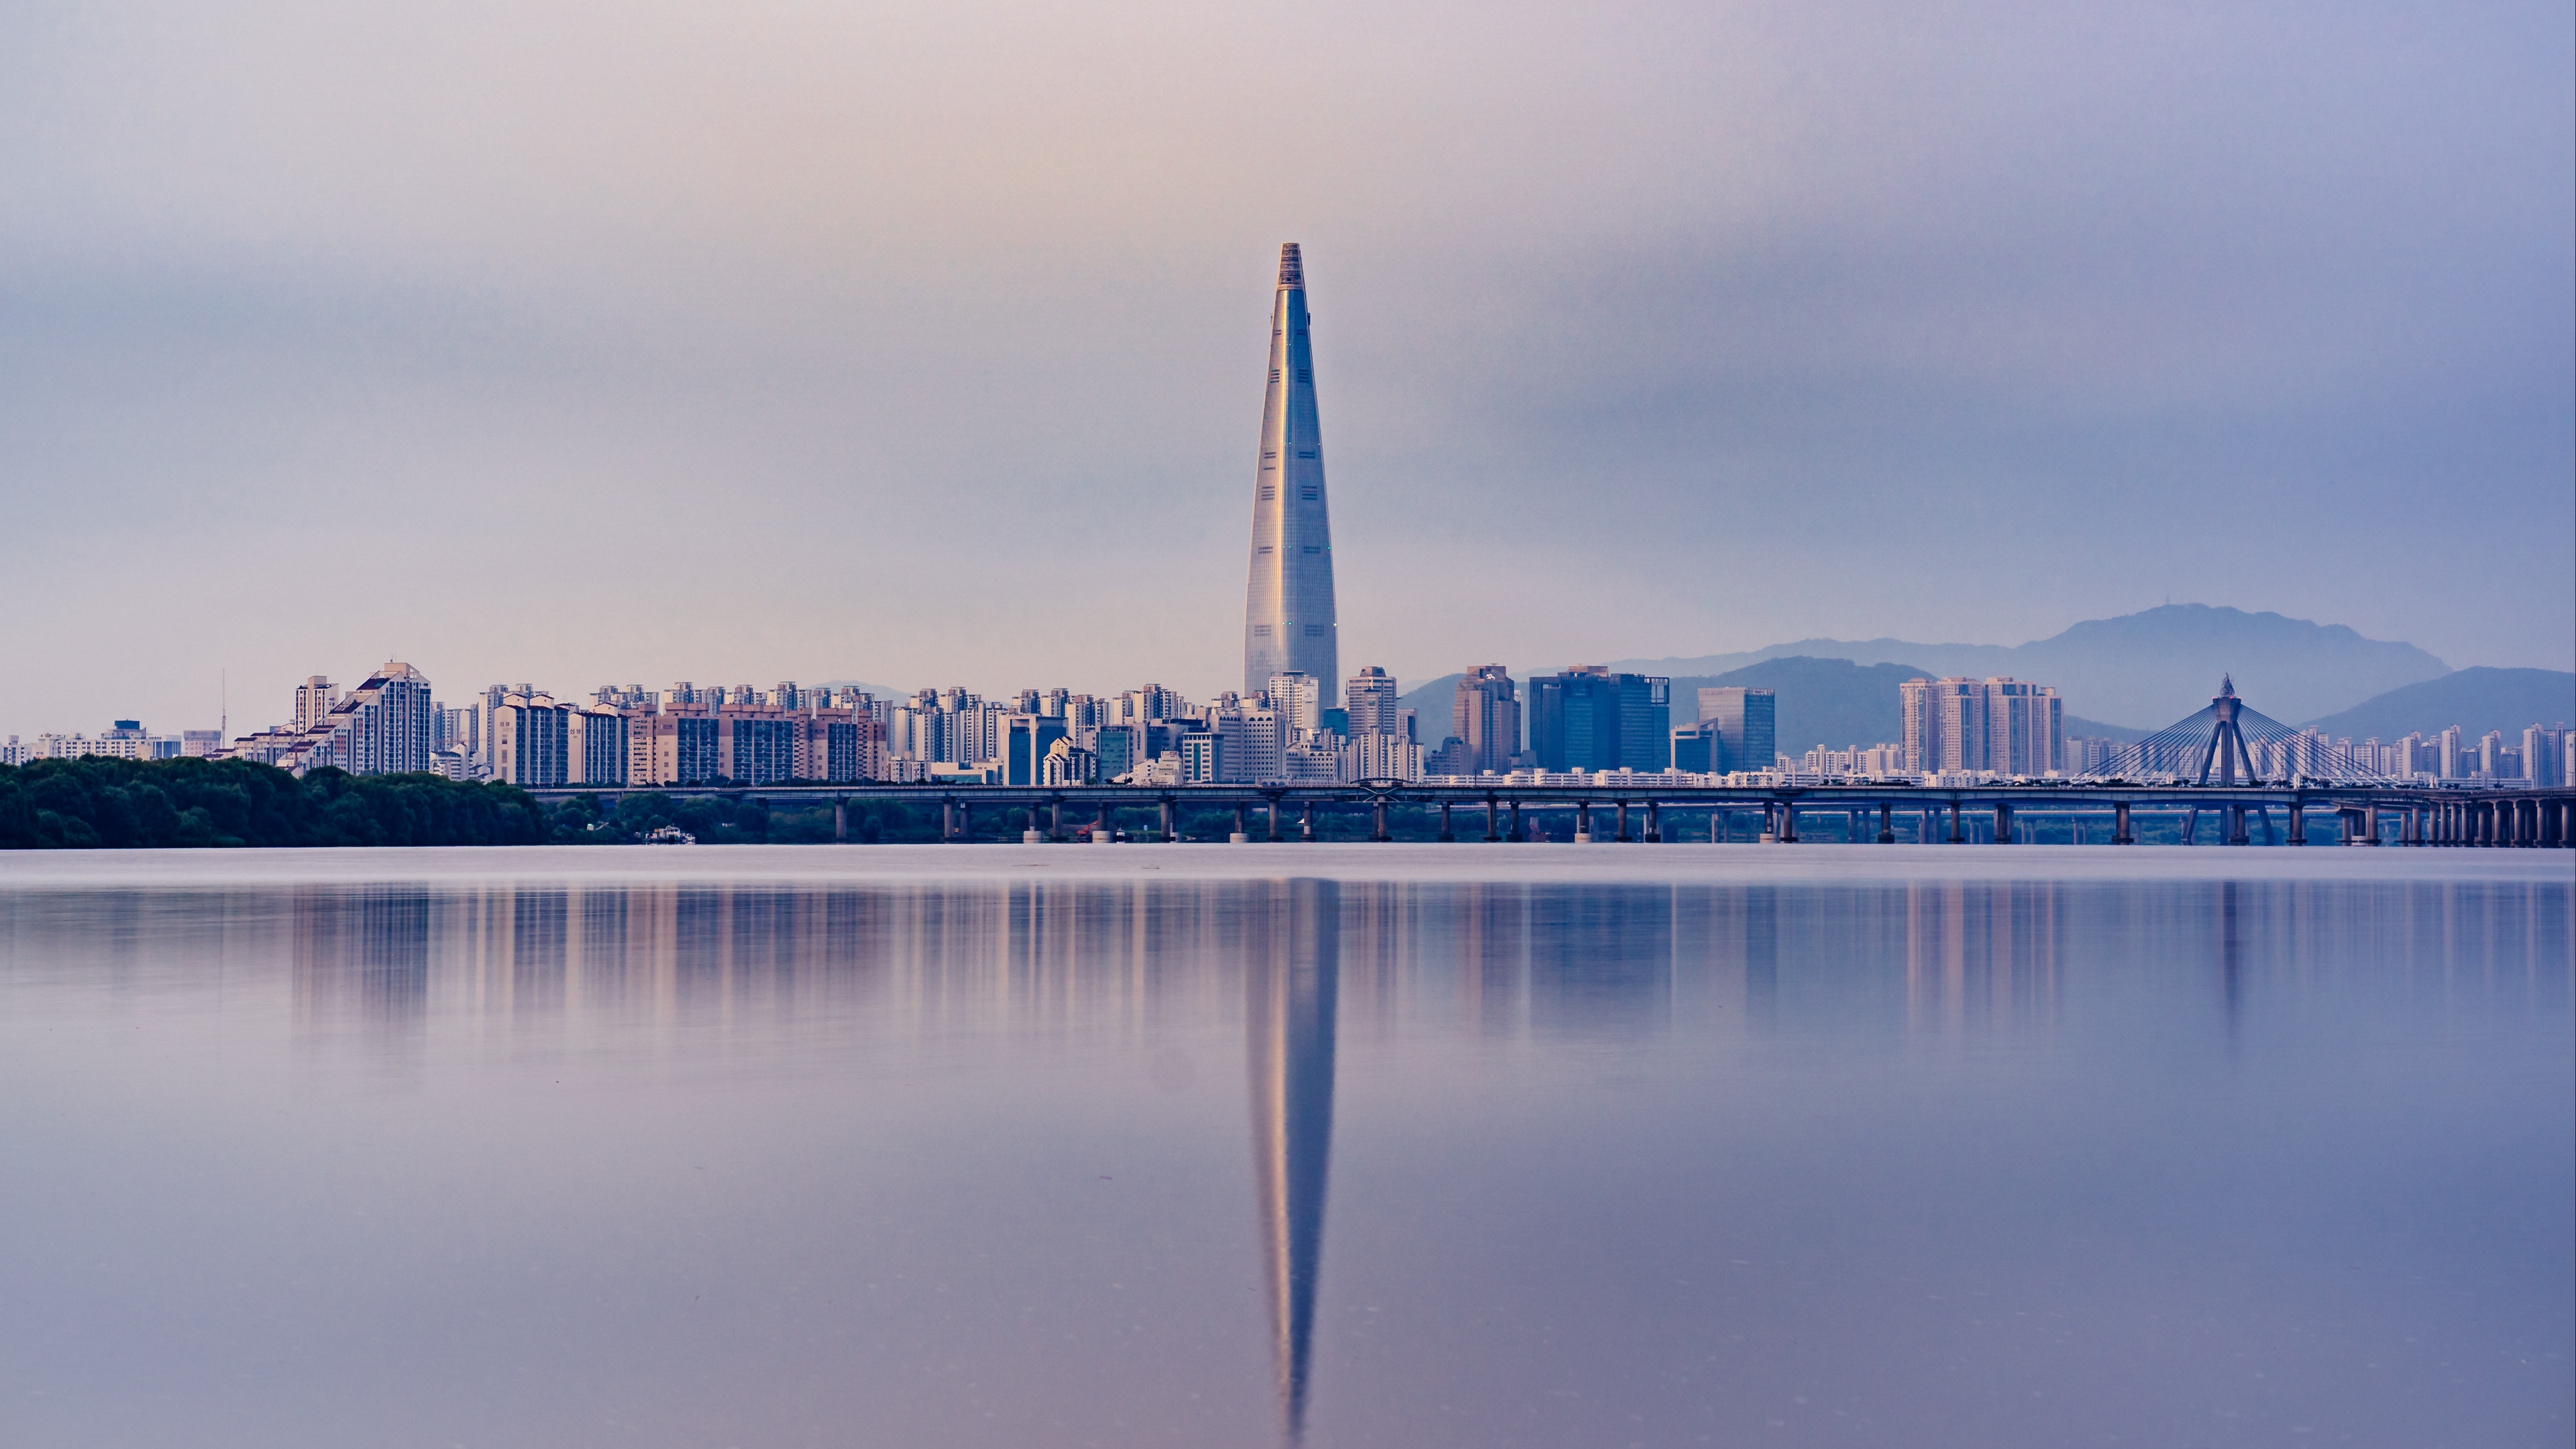 Seoul Photos, Download The BEST Free Seoul Stock Photos & HD Images